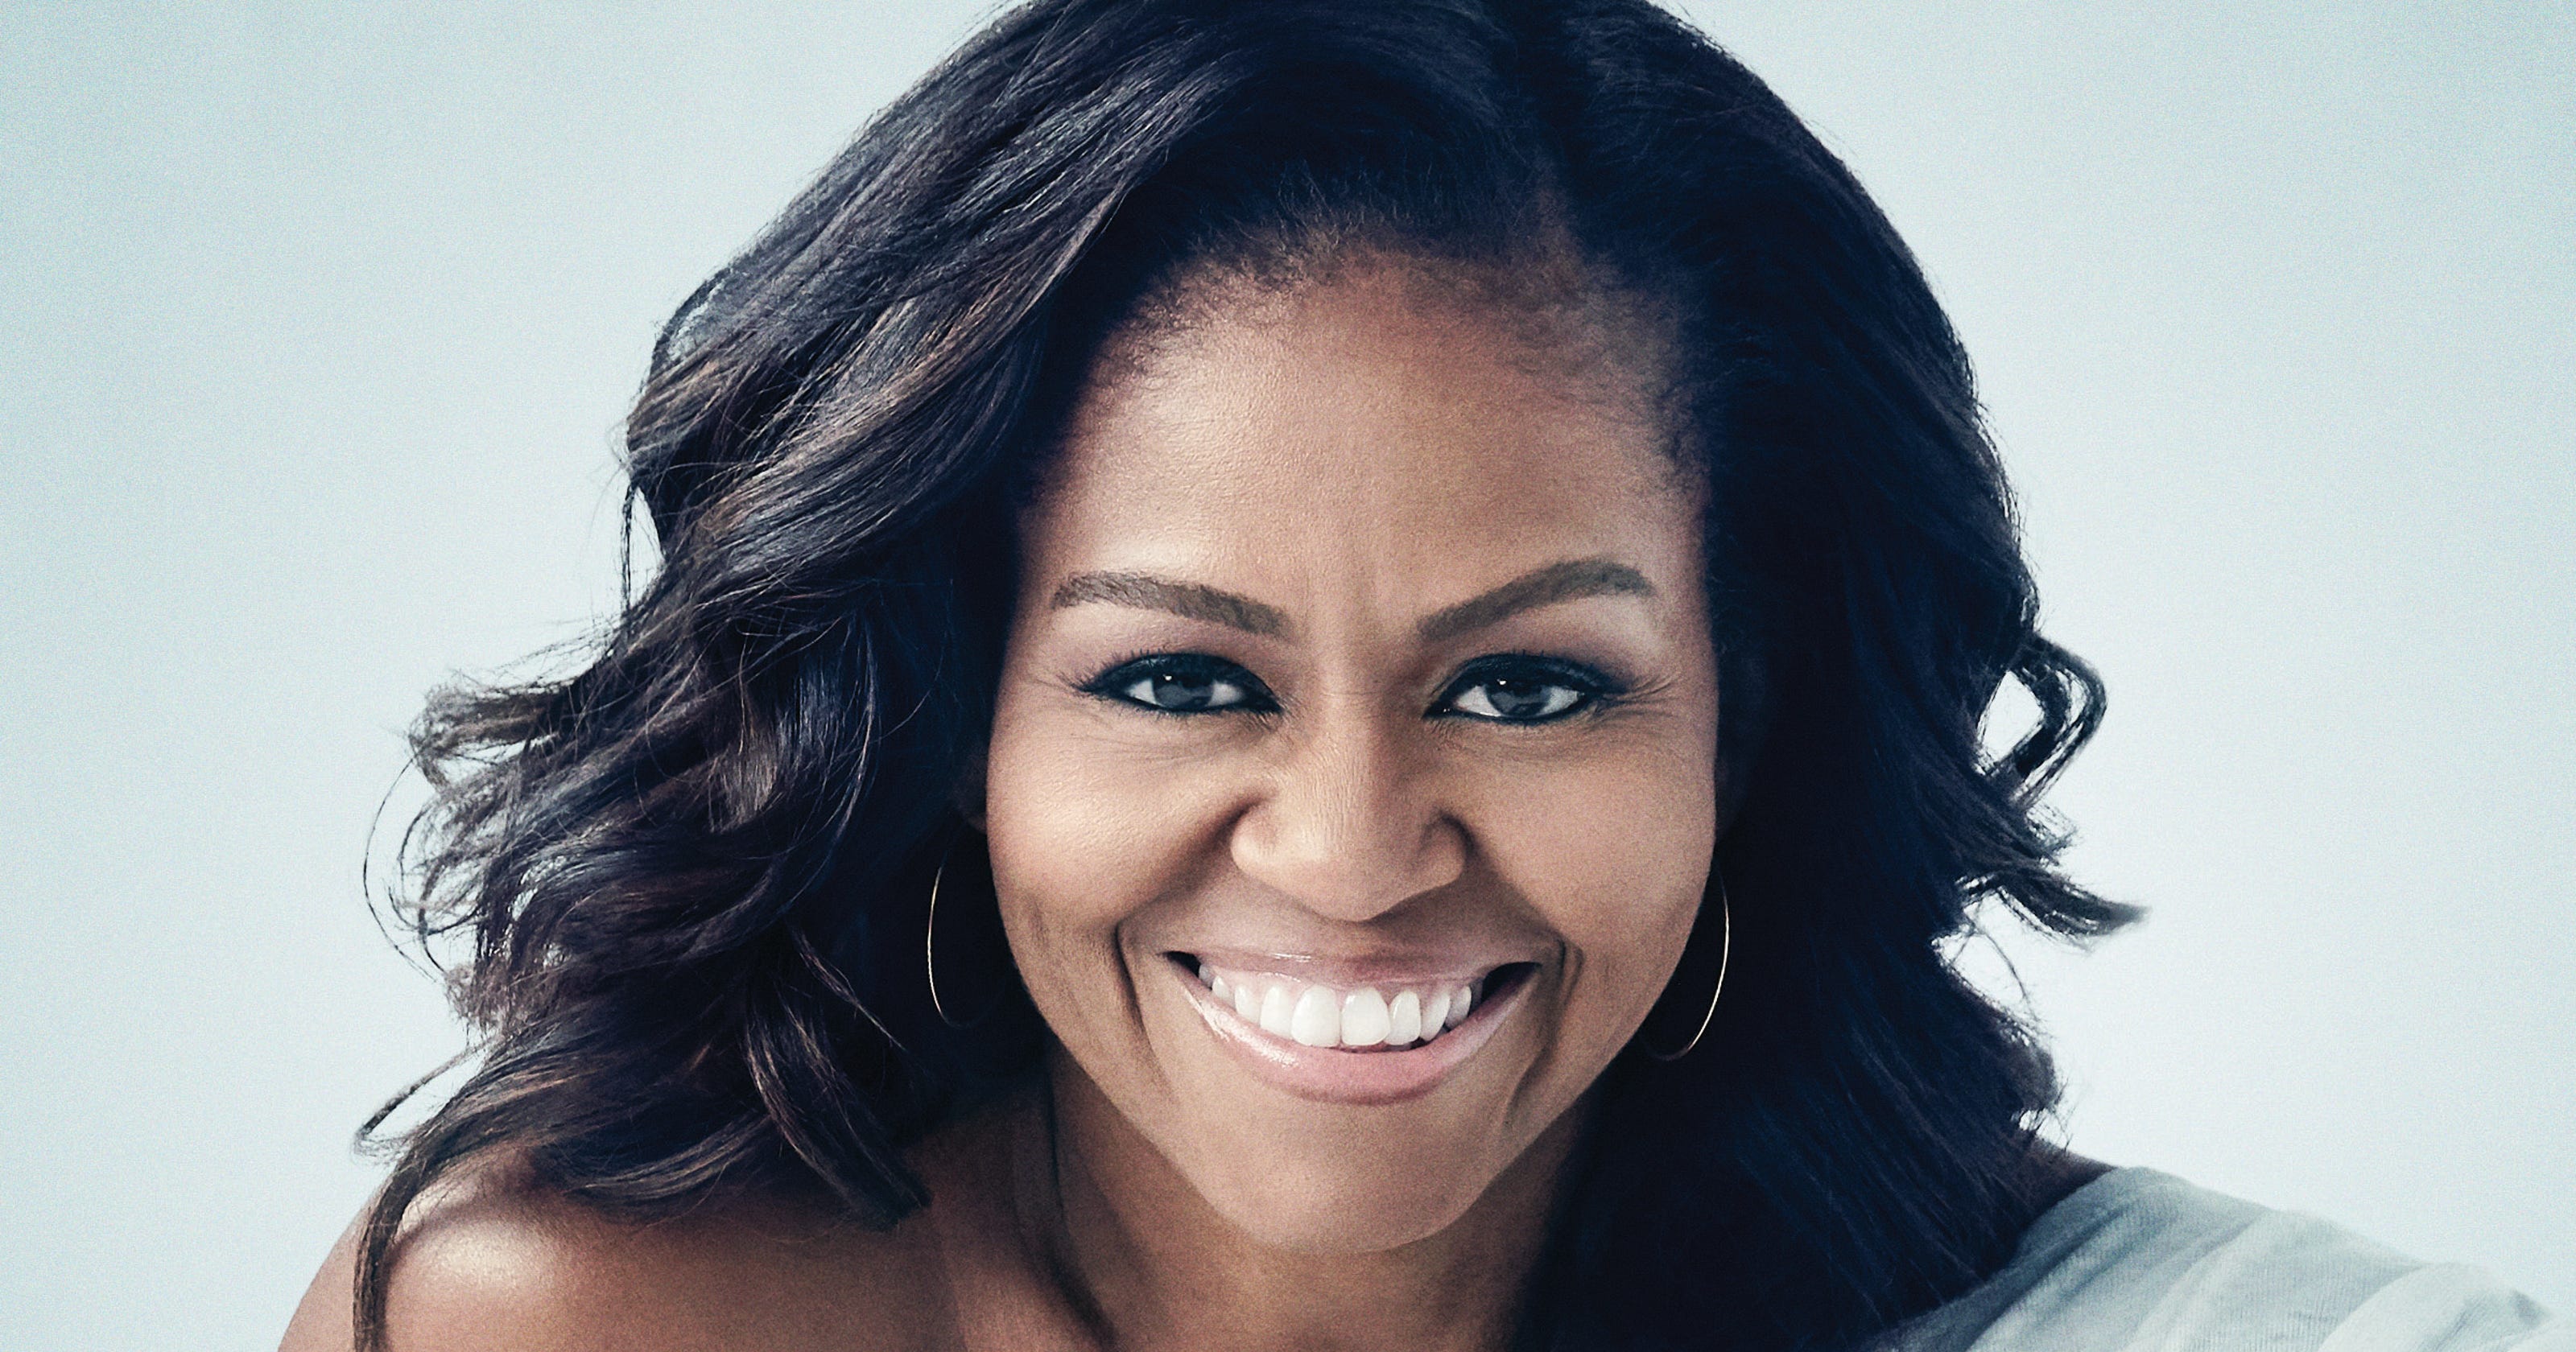 Michelle Obama book tour reaches Florida in May for her only visit